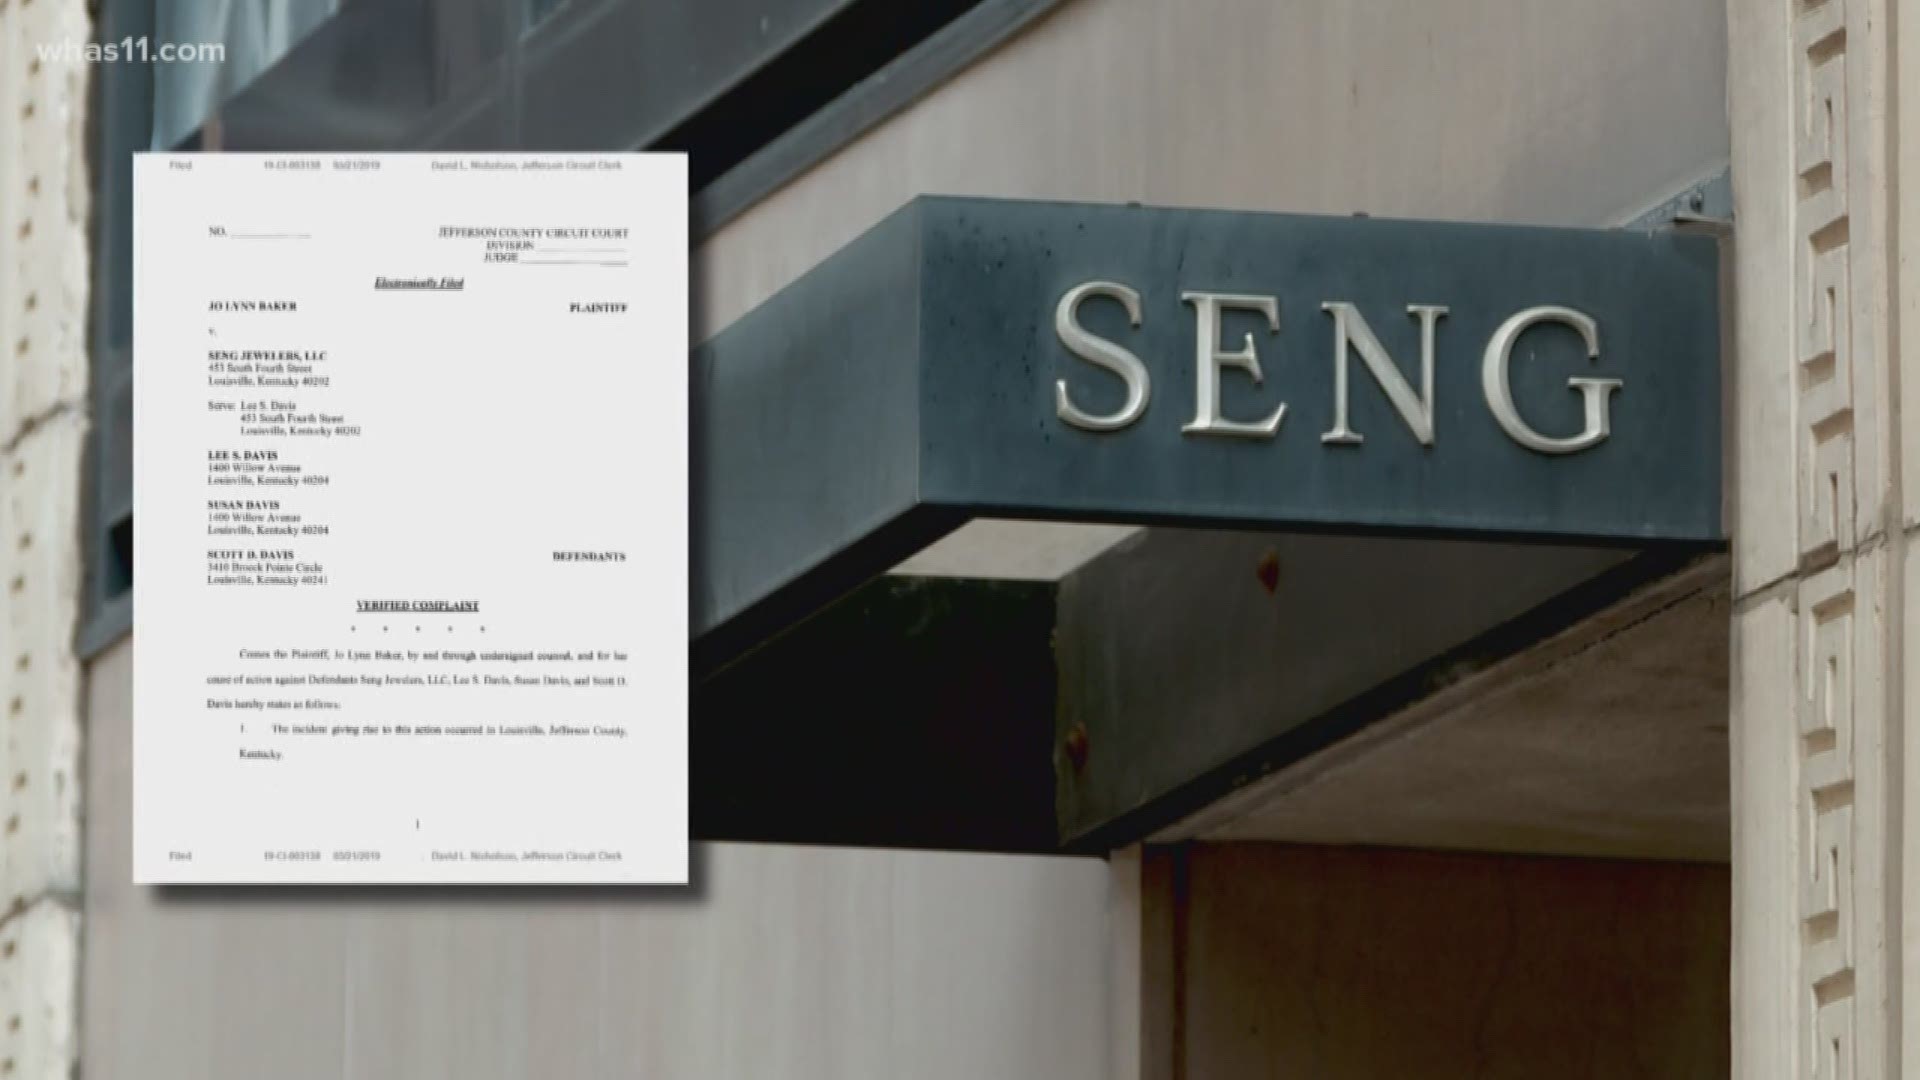 The owners of Seng Jewelers face accusations of pulling a heist on one of their customers.